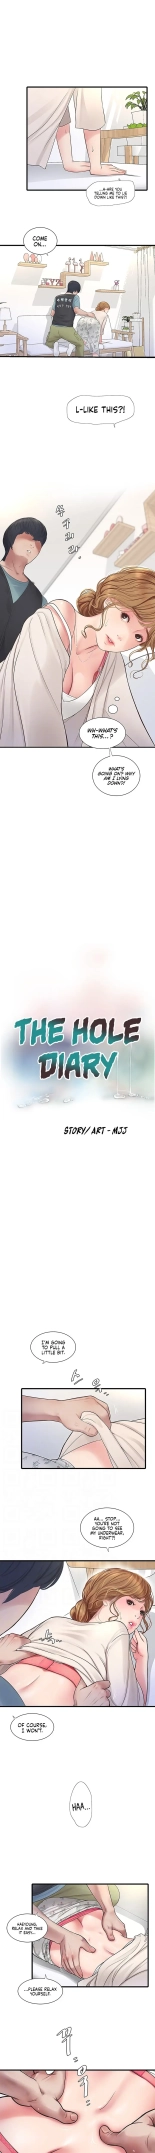 The Hole Diary chapter 2 : page 3